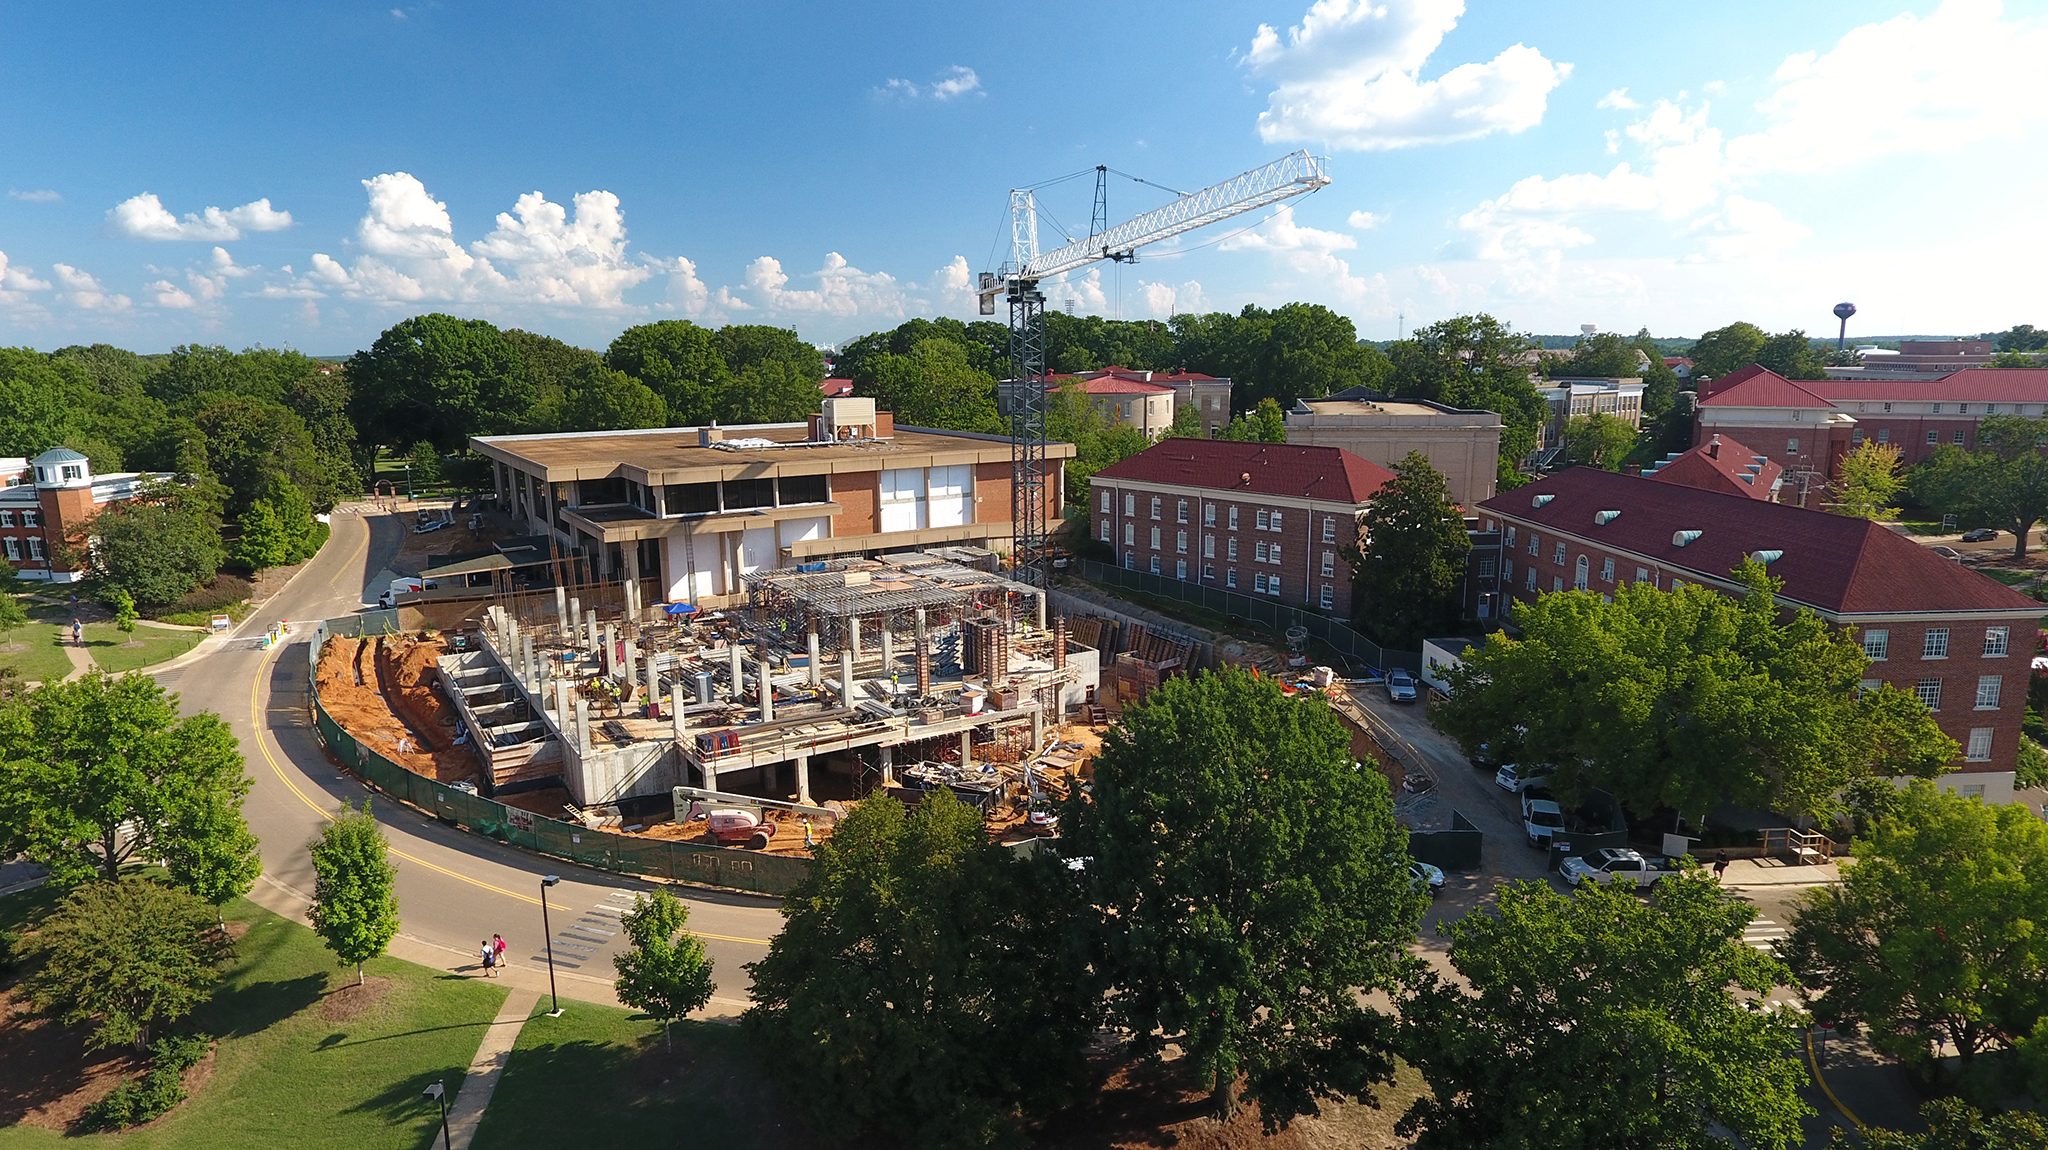 The Ole Miss Student Union renovation and expansion project is fully underway with closings and temporary relocations scheduled in the coming weeks. Photo by Robert Jordan/Ole Miss Communications